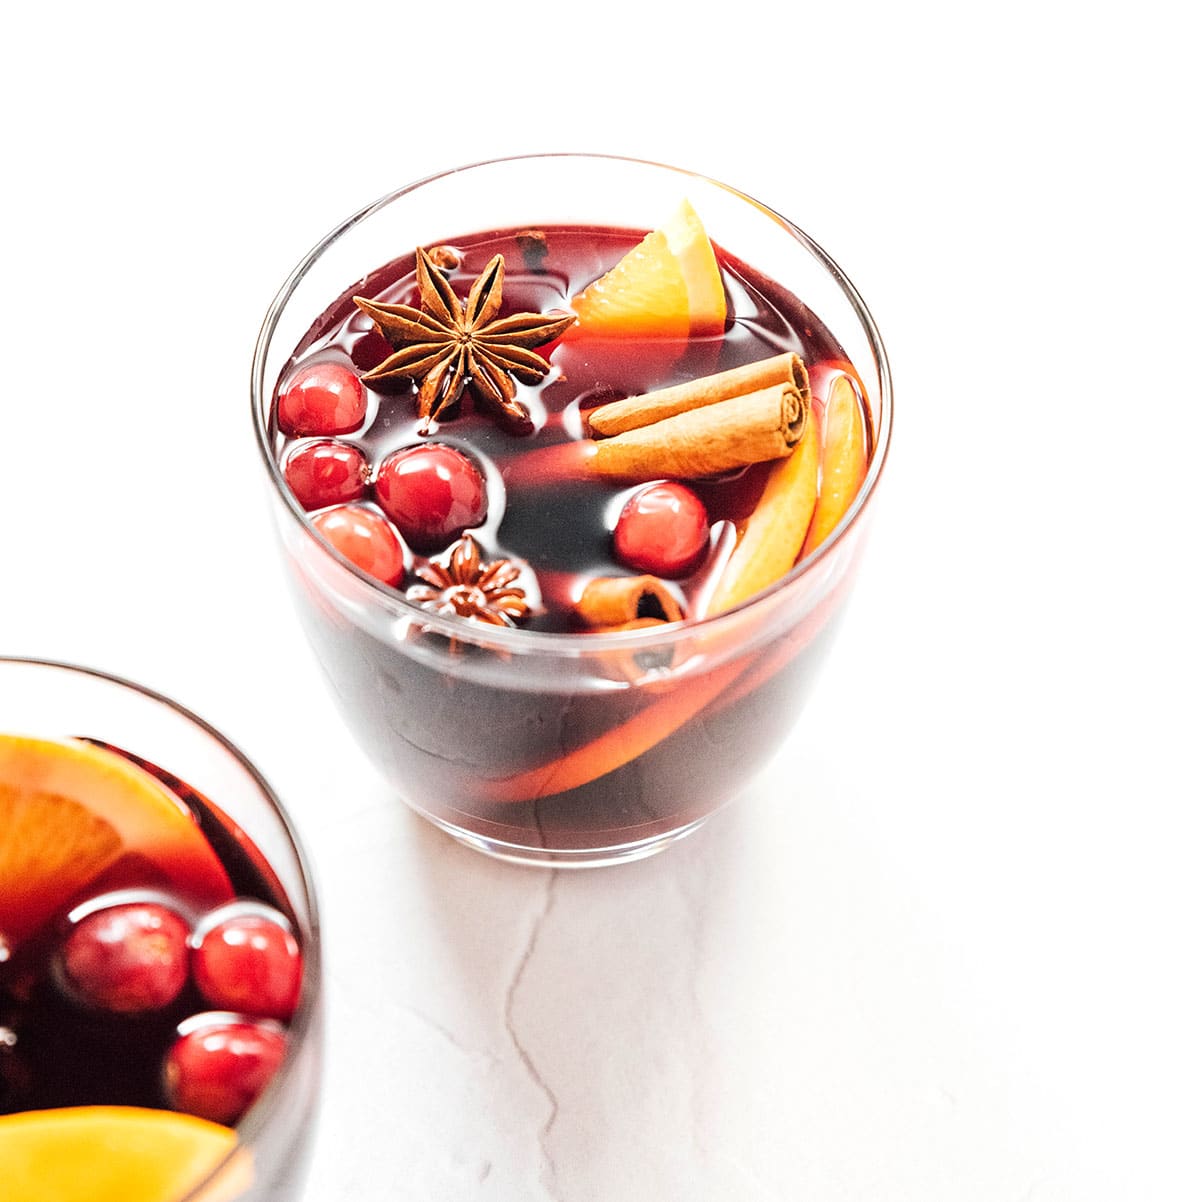 A short glass filled with gluhwein and garnished with orange slices, cinnamon sticks, star anise, and cranberries